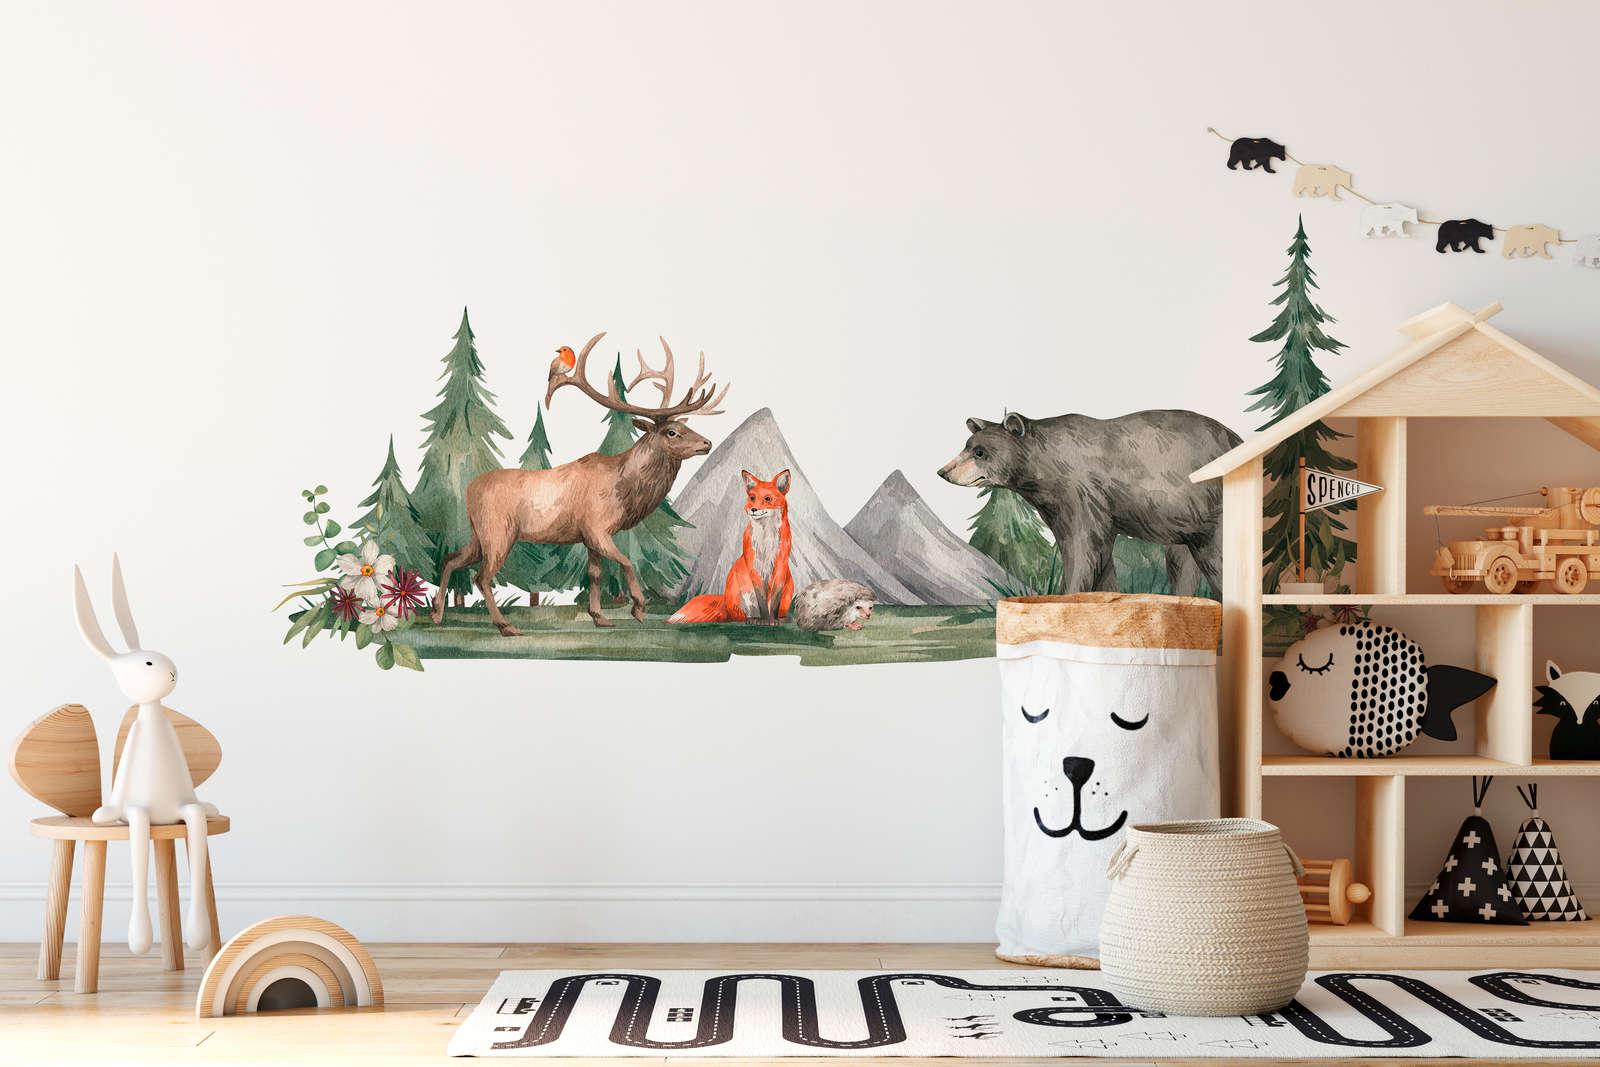             Nursery Wallpaper with Animals in the Forest - Green, Brown, White
        